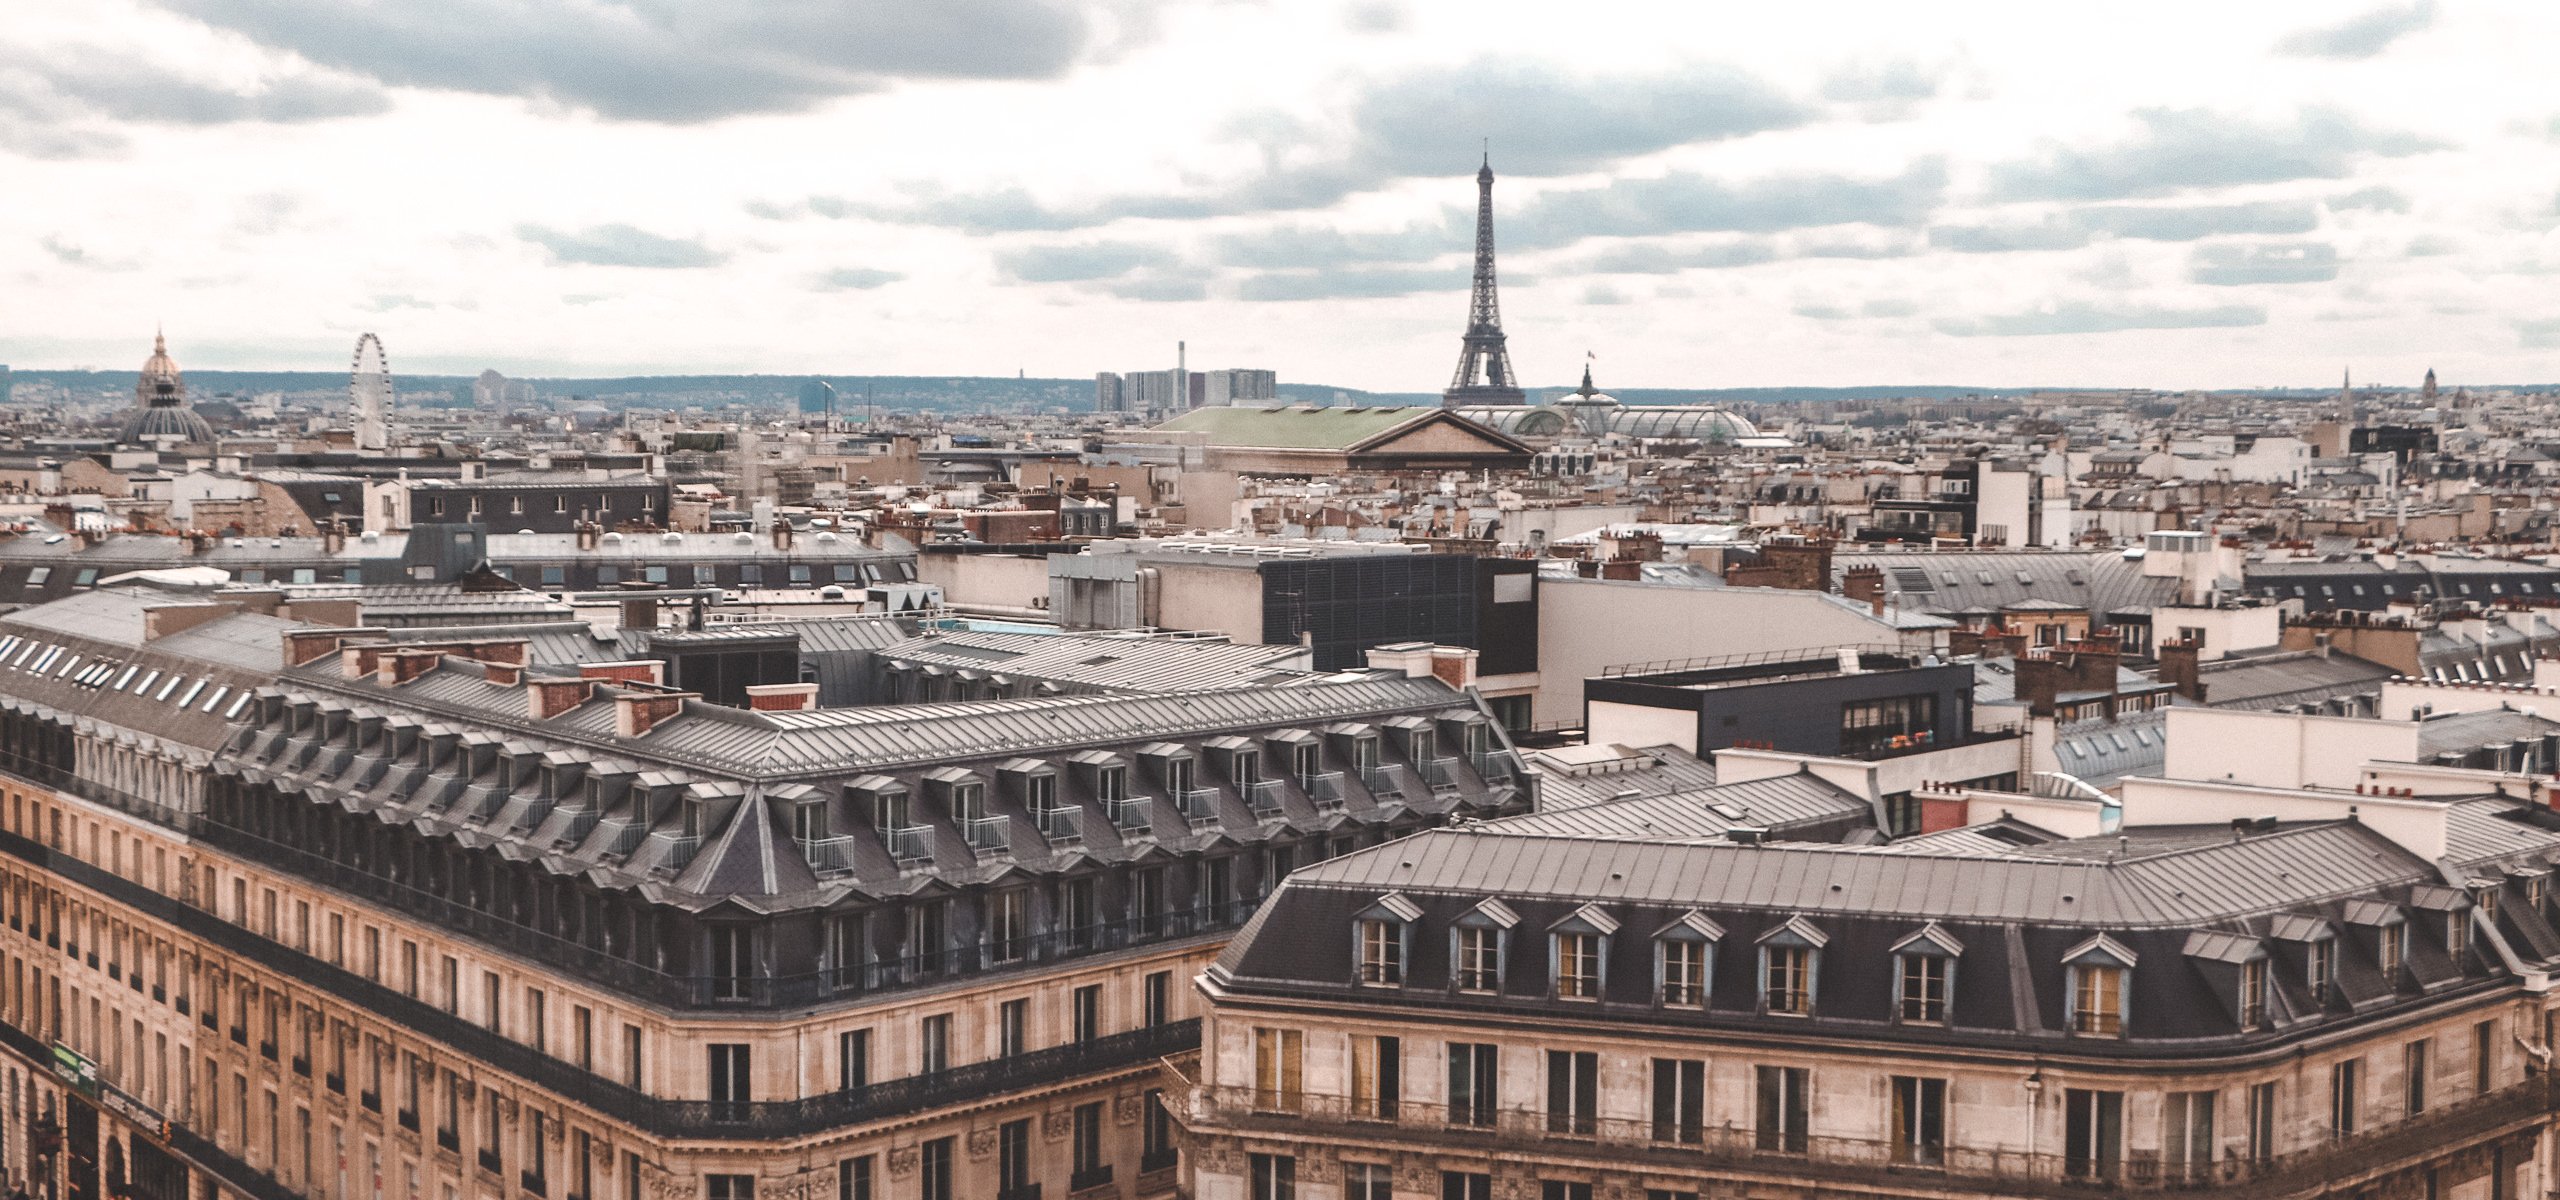 View of Parisian rooftops from Galaries Lafayette, Paris